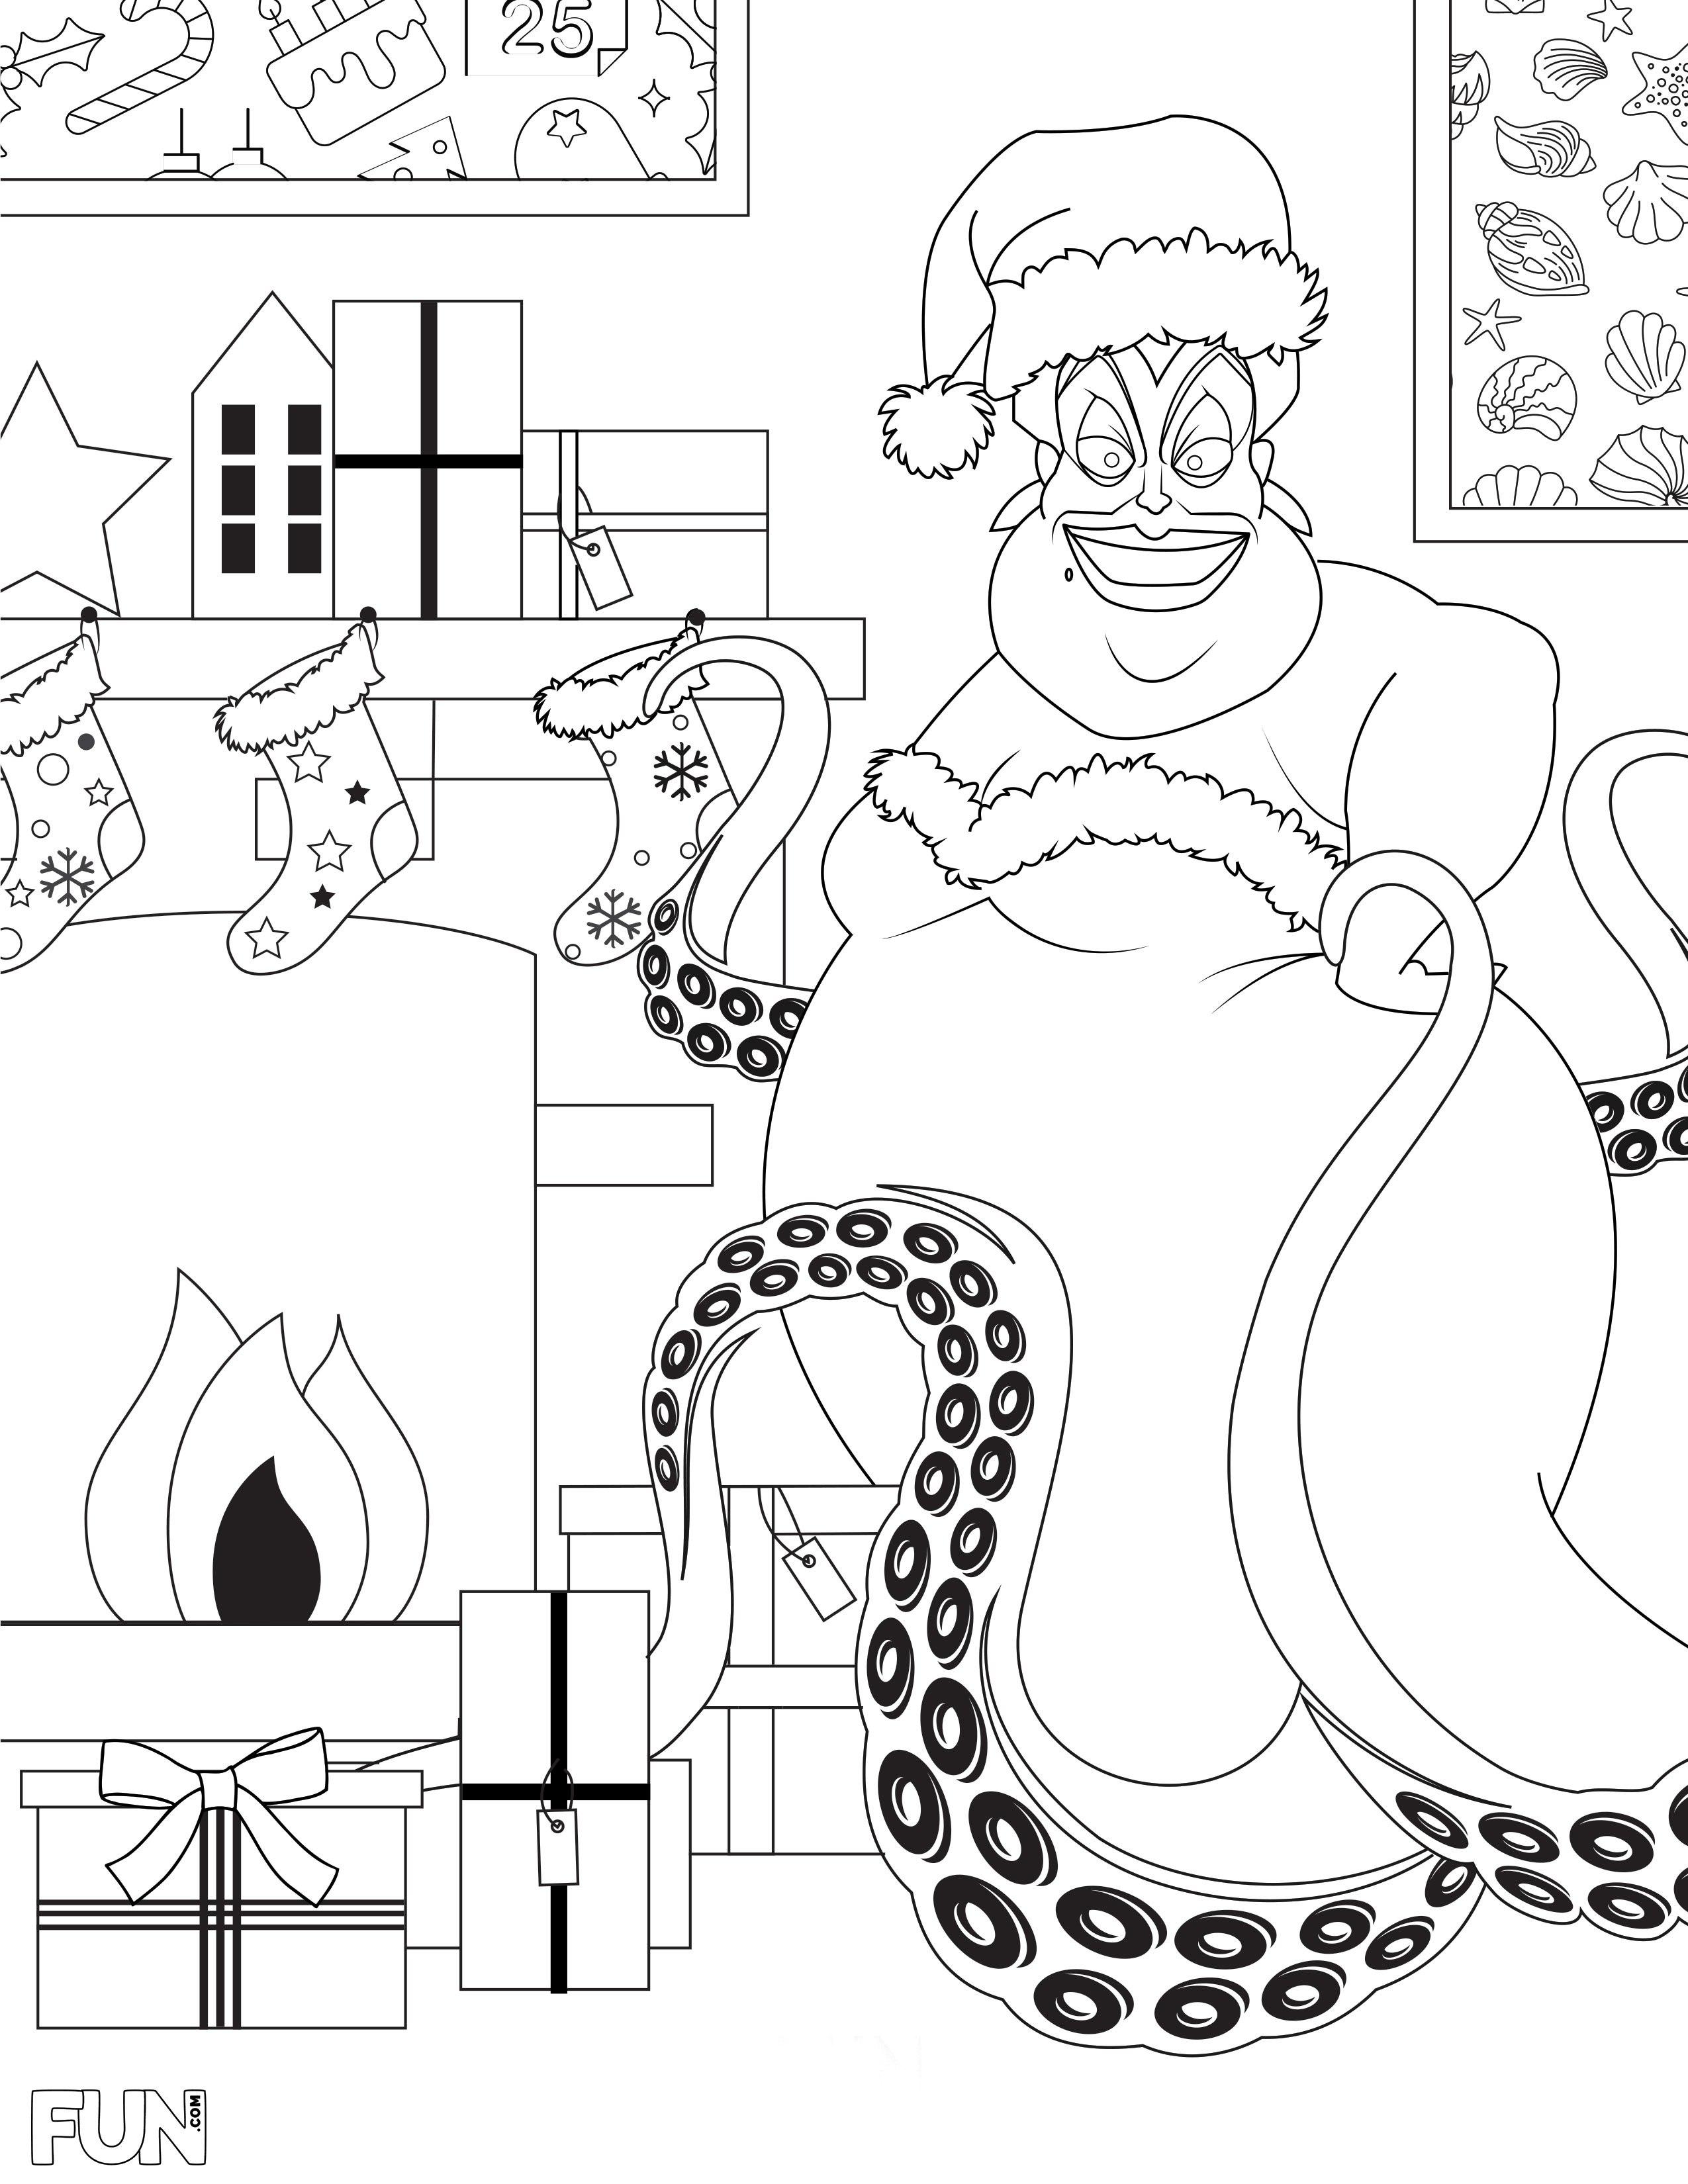 Disney villains christmas coloring pages printables